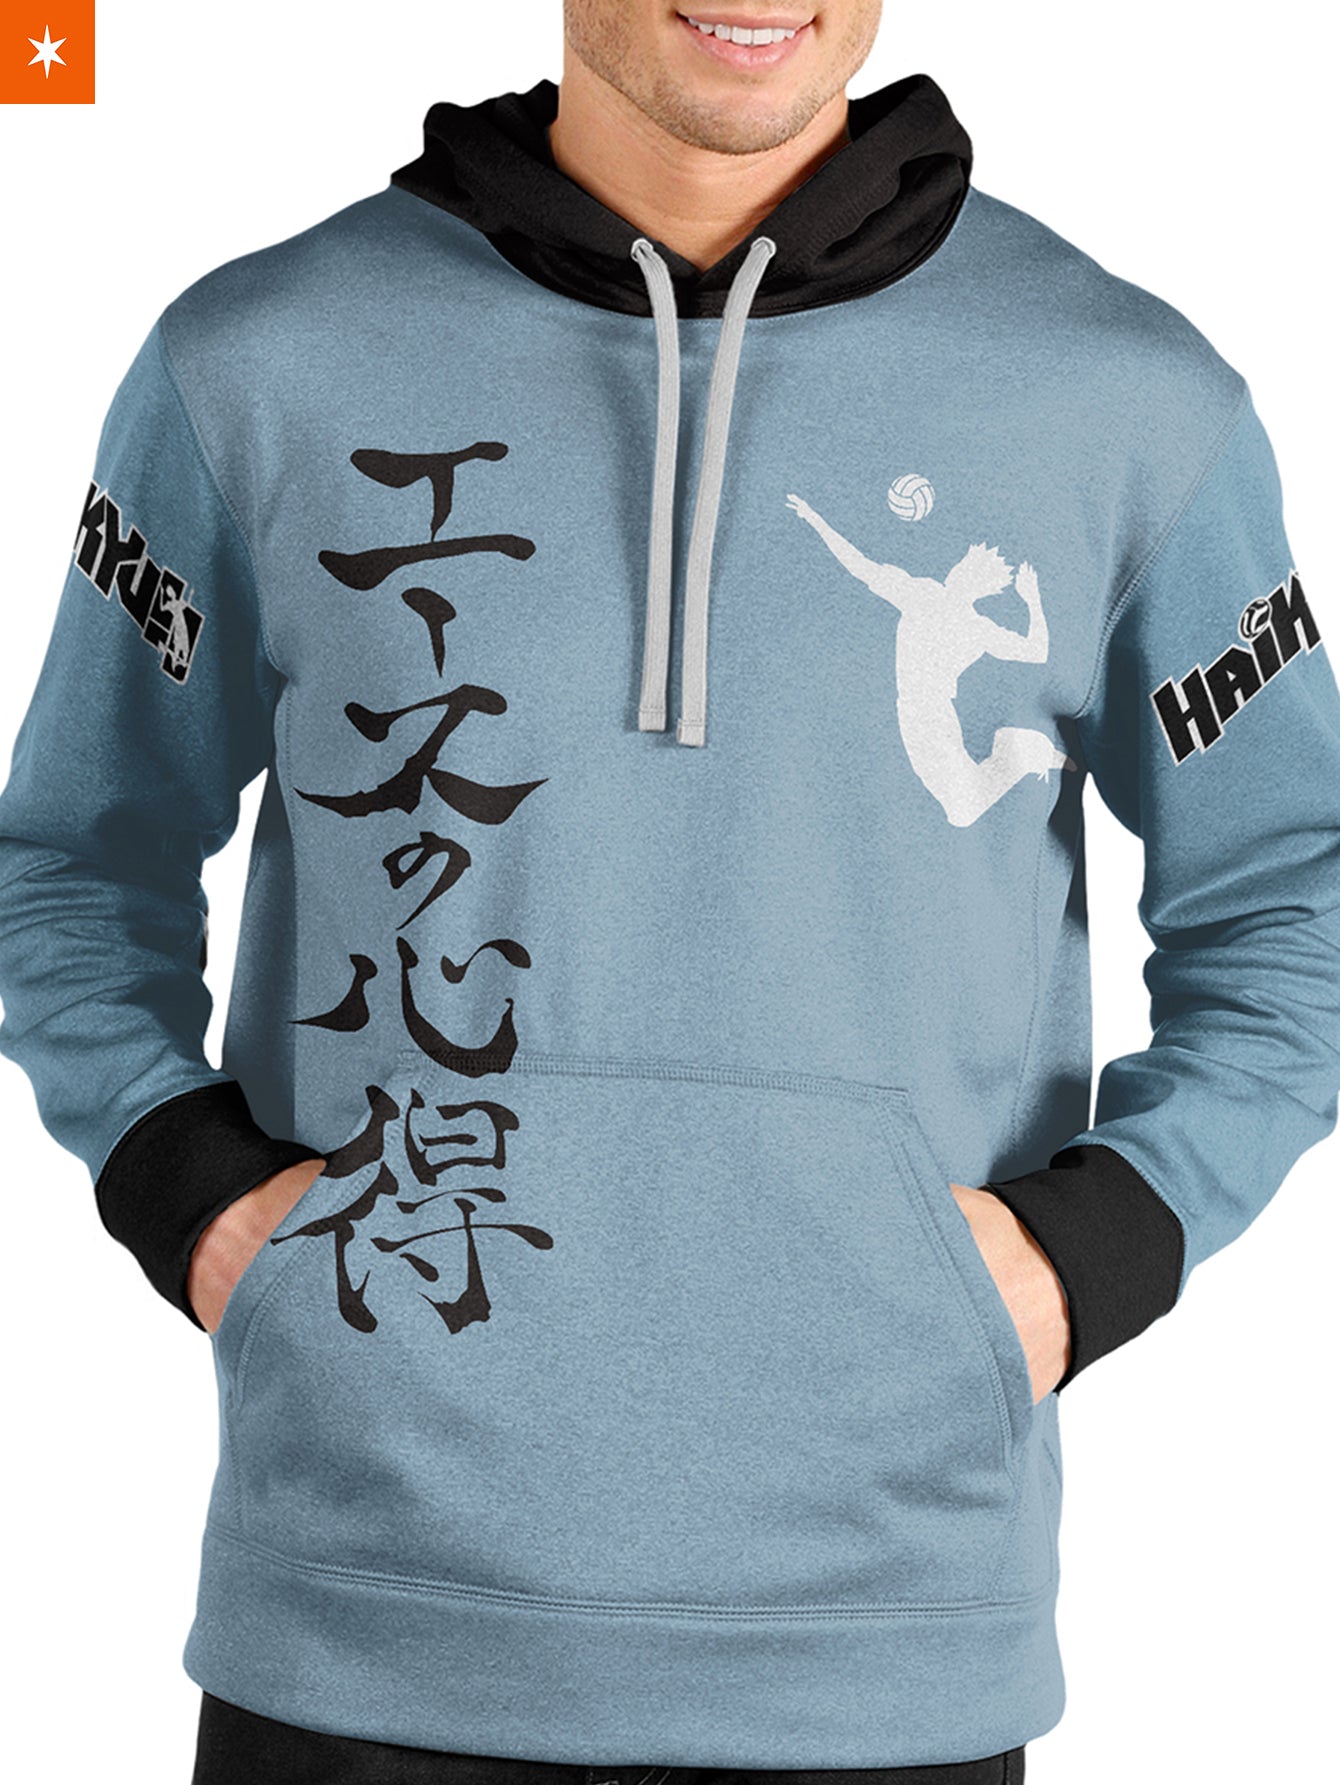 Fandomaniax - The Way of the Ace Unisex Pullover Hoodie